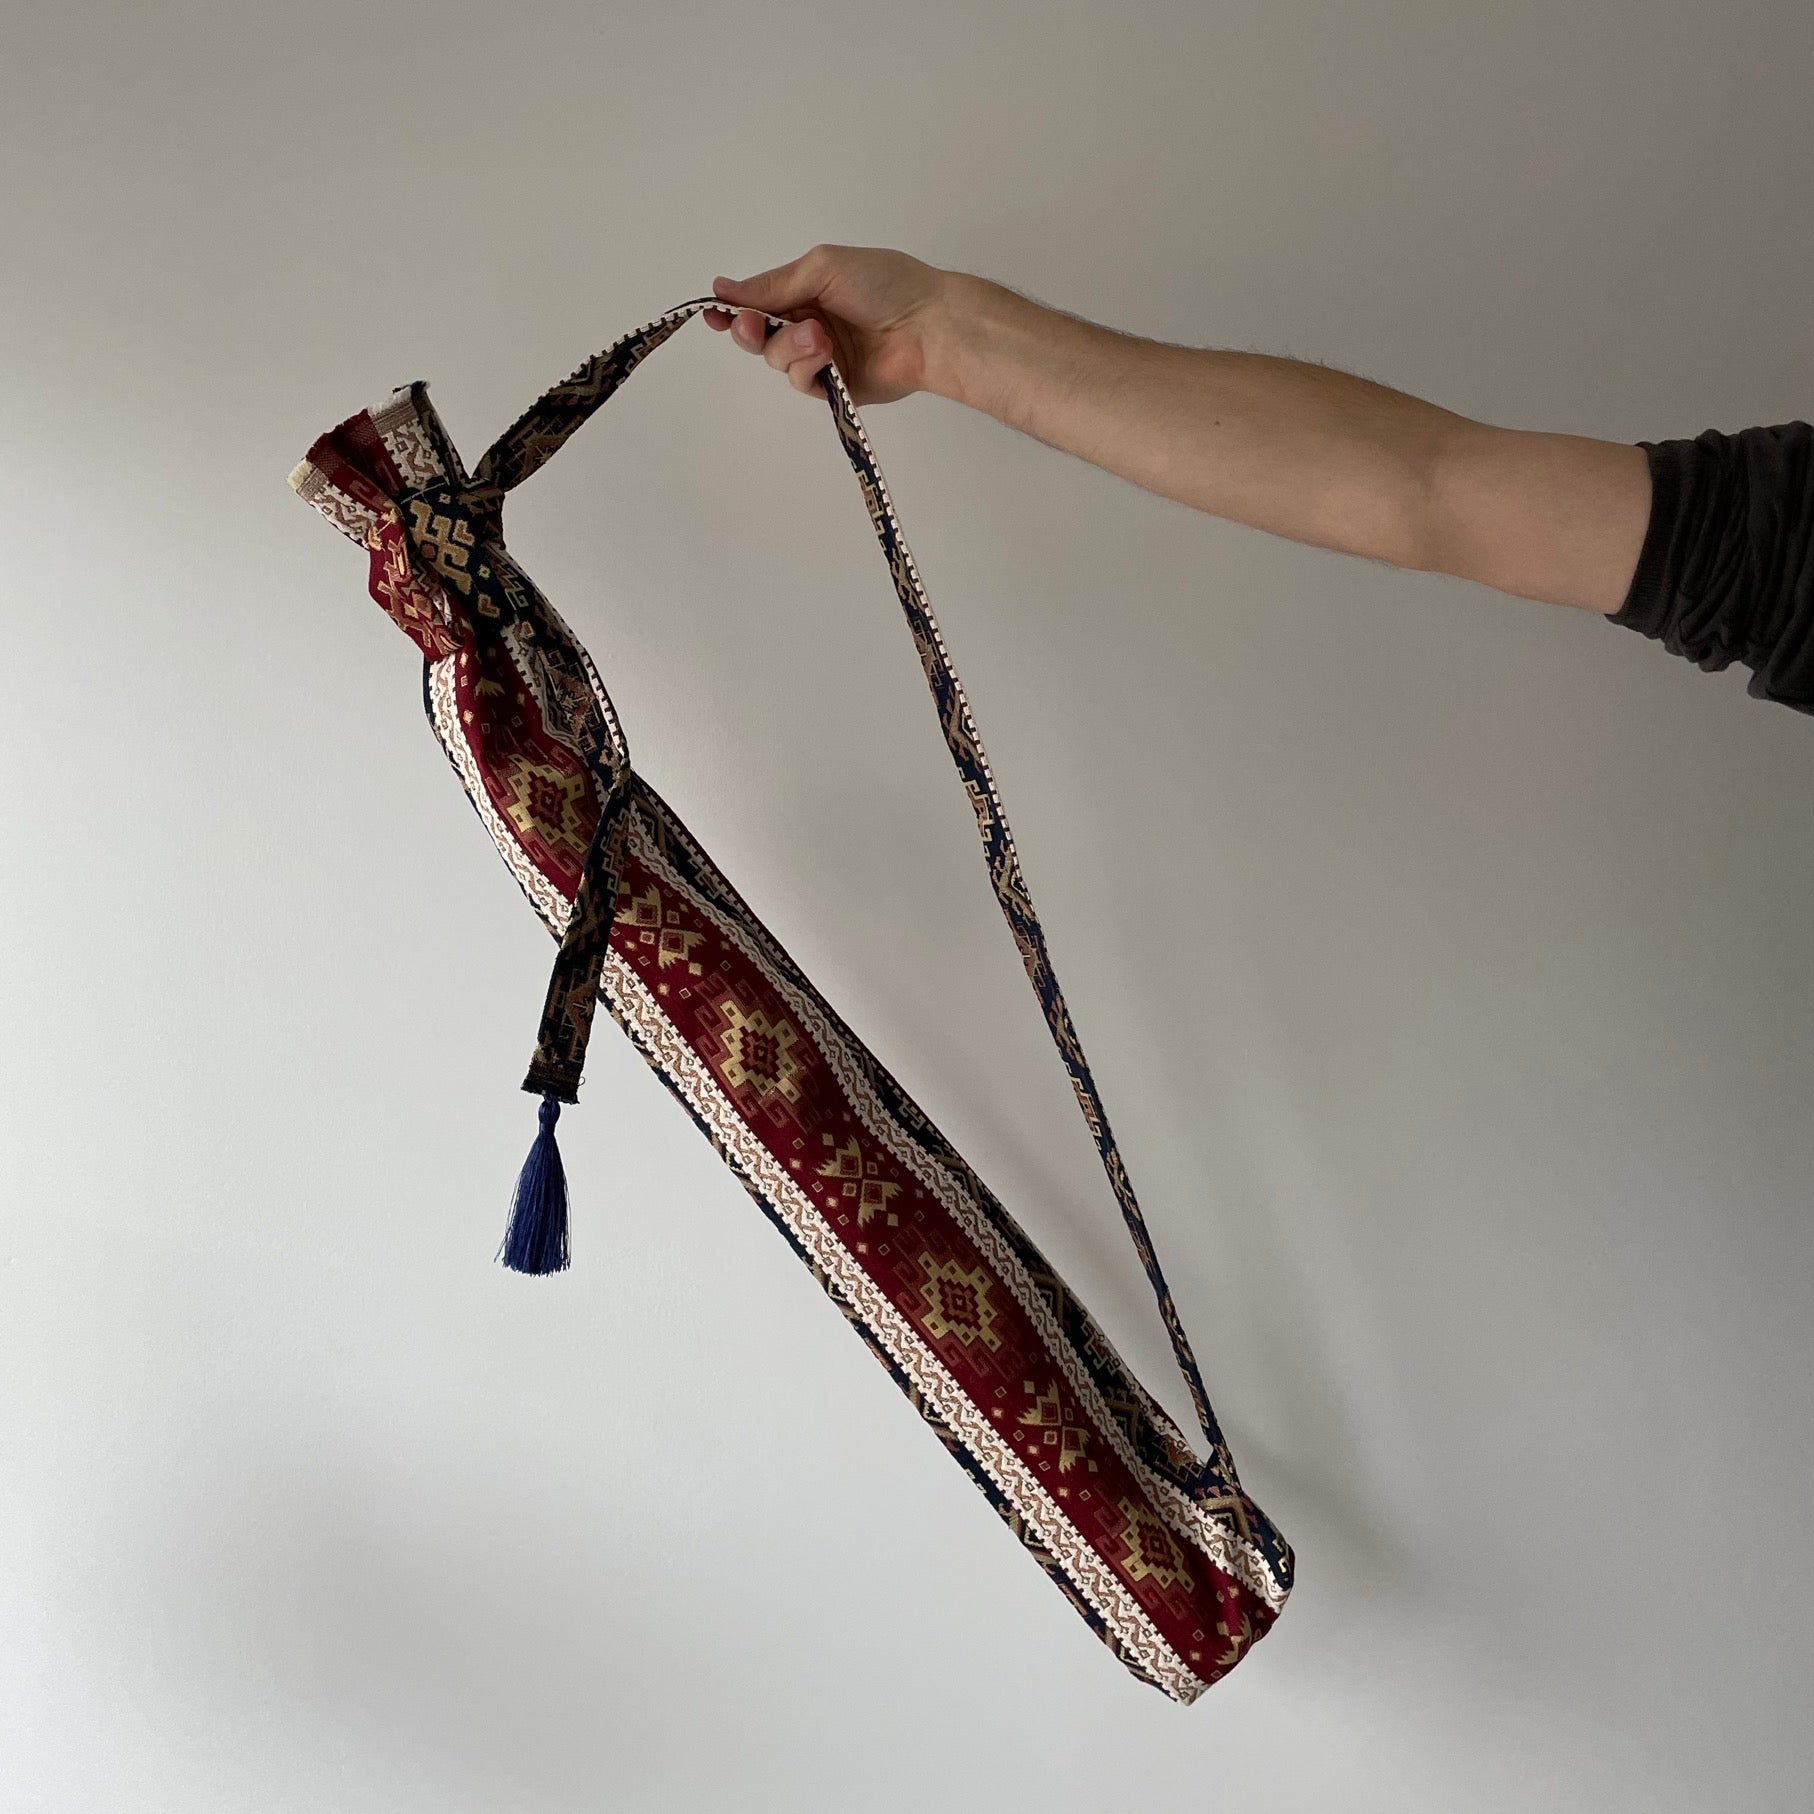 Flute Bamboo with Flute Bag - The Wandering Bull, LLC